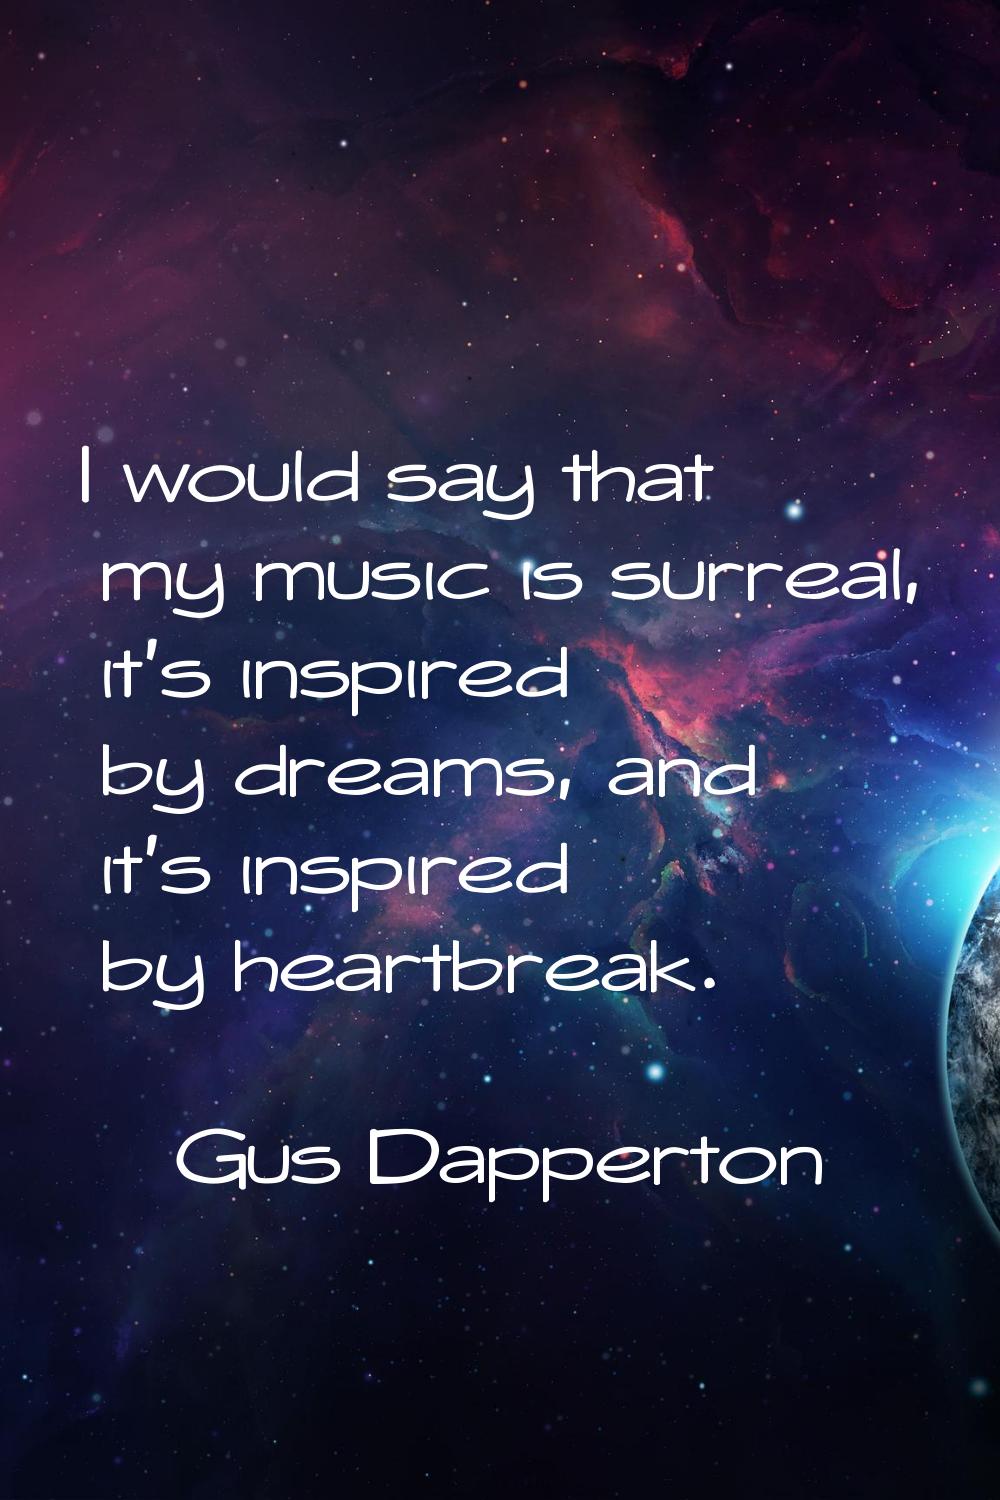 I would say that my music is surreal, it's inspired by dreams, and it's inspired by heartbreak.